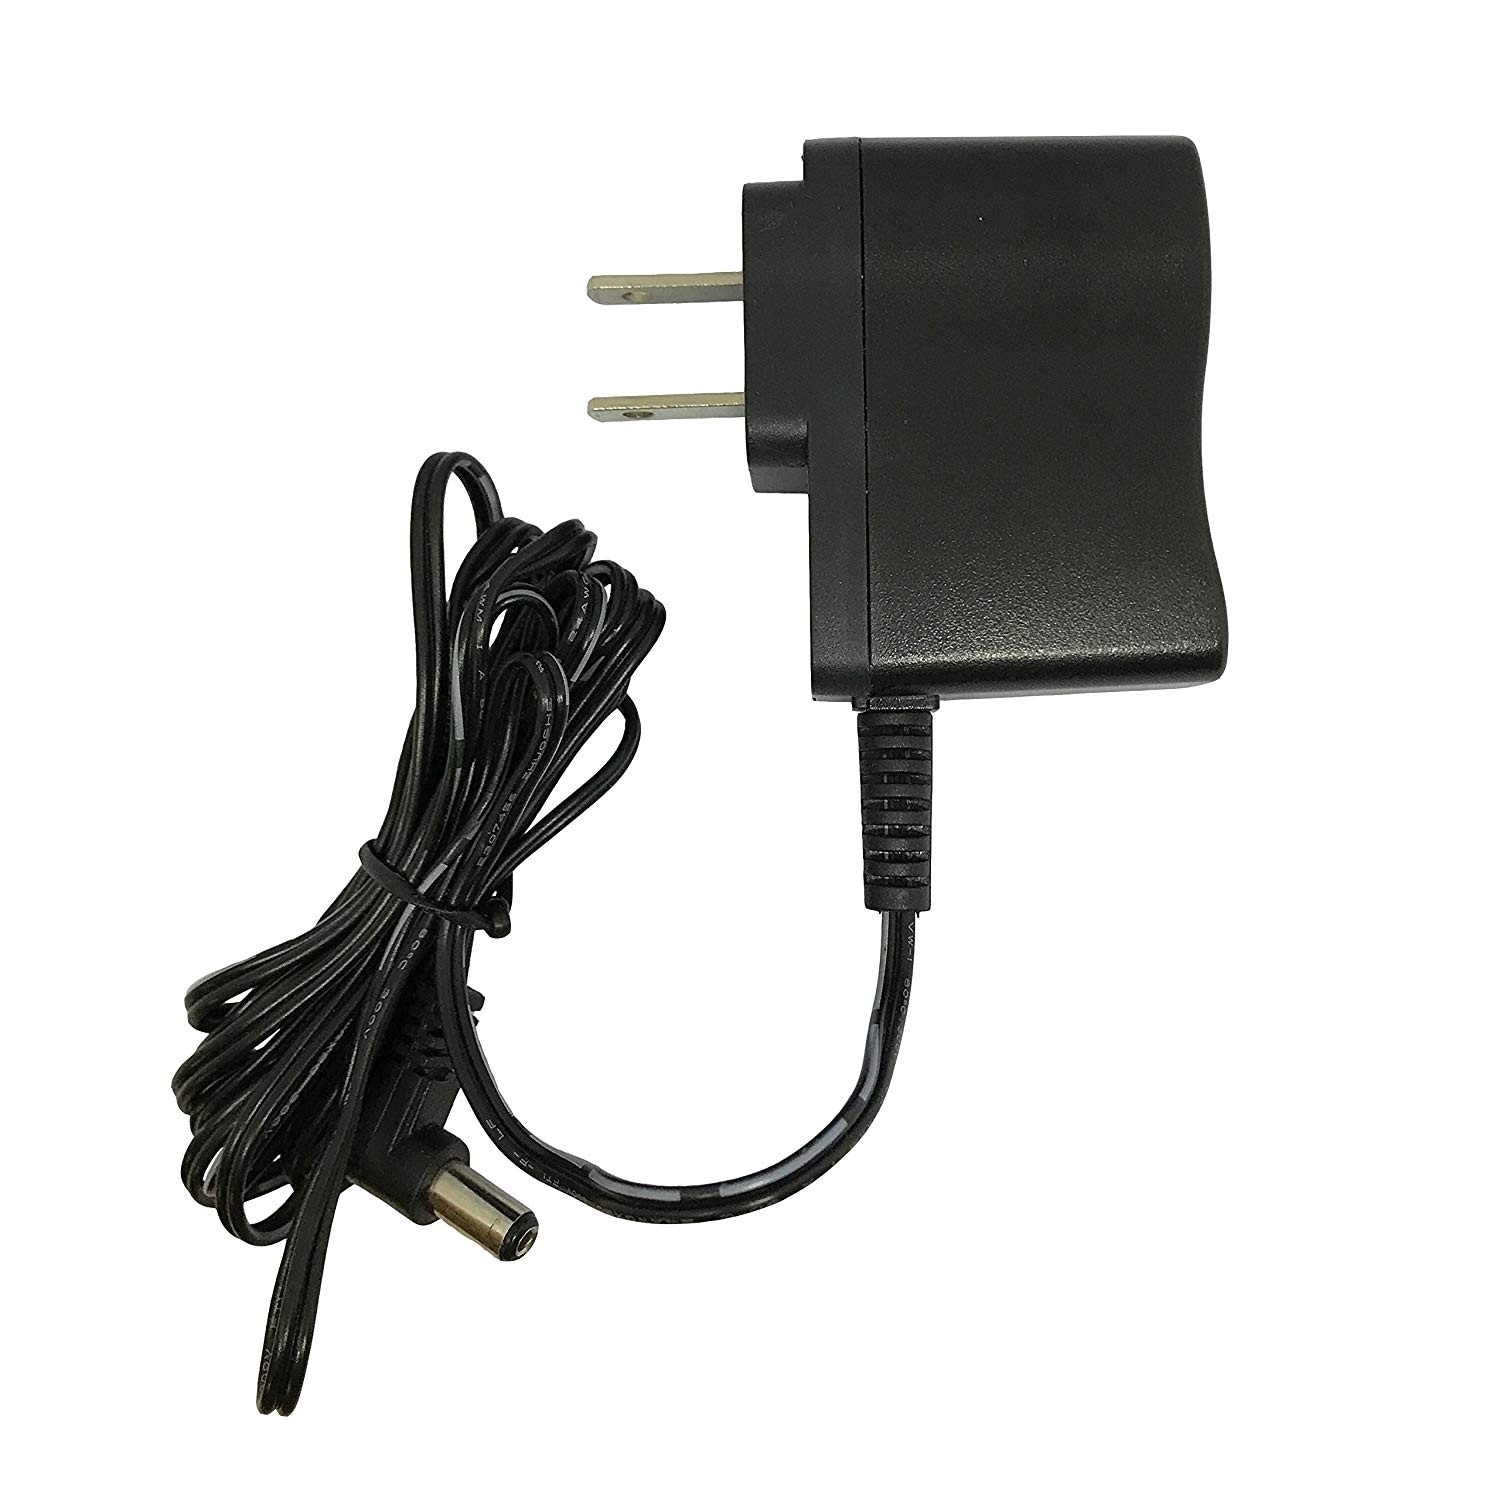 https://ak1.ostkcdn.com/images/products/2495154/AC-Power-Adapter-for-Stainless-Steel-Automatic-Sensor-Trash-Cans-UL-Listed-Energy-Saving-13239e0b-9e57-48bc-8686-24f291b36681.jpg